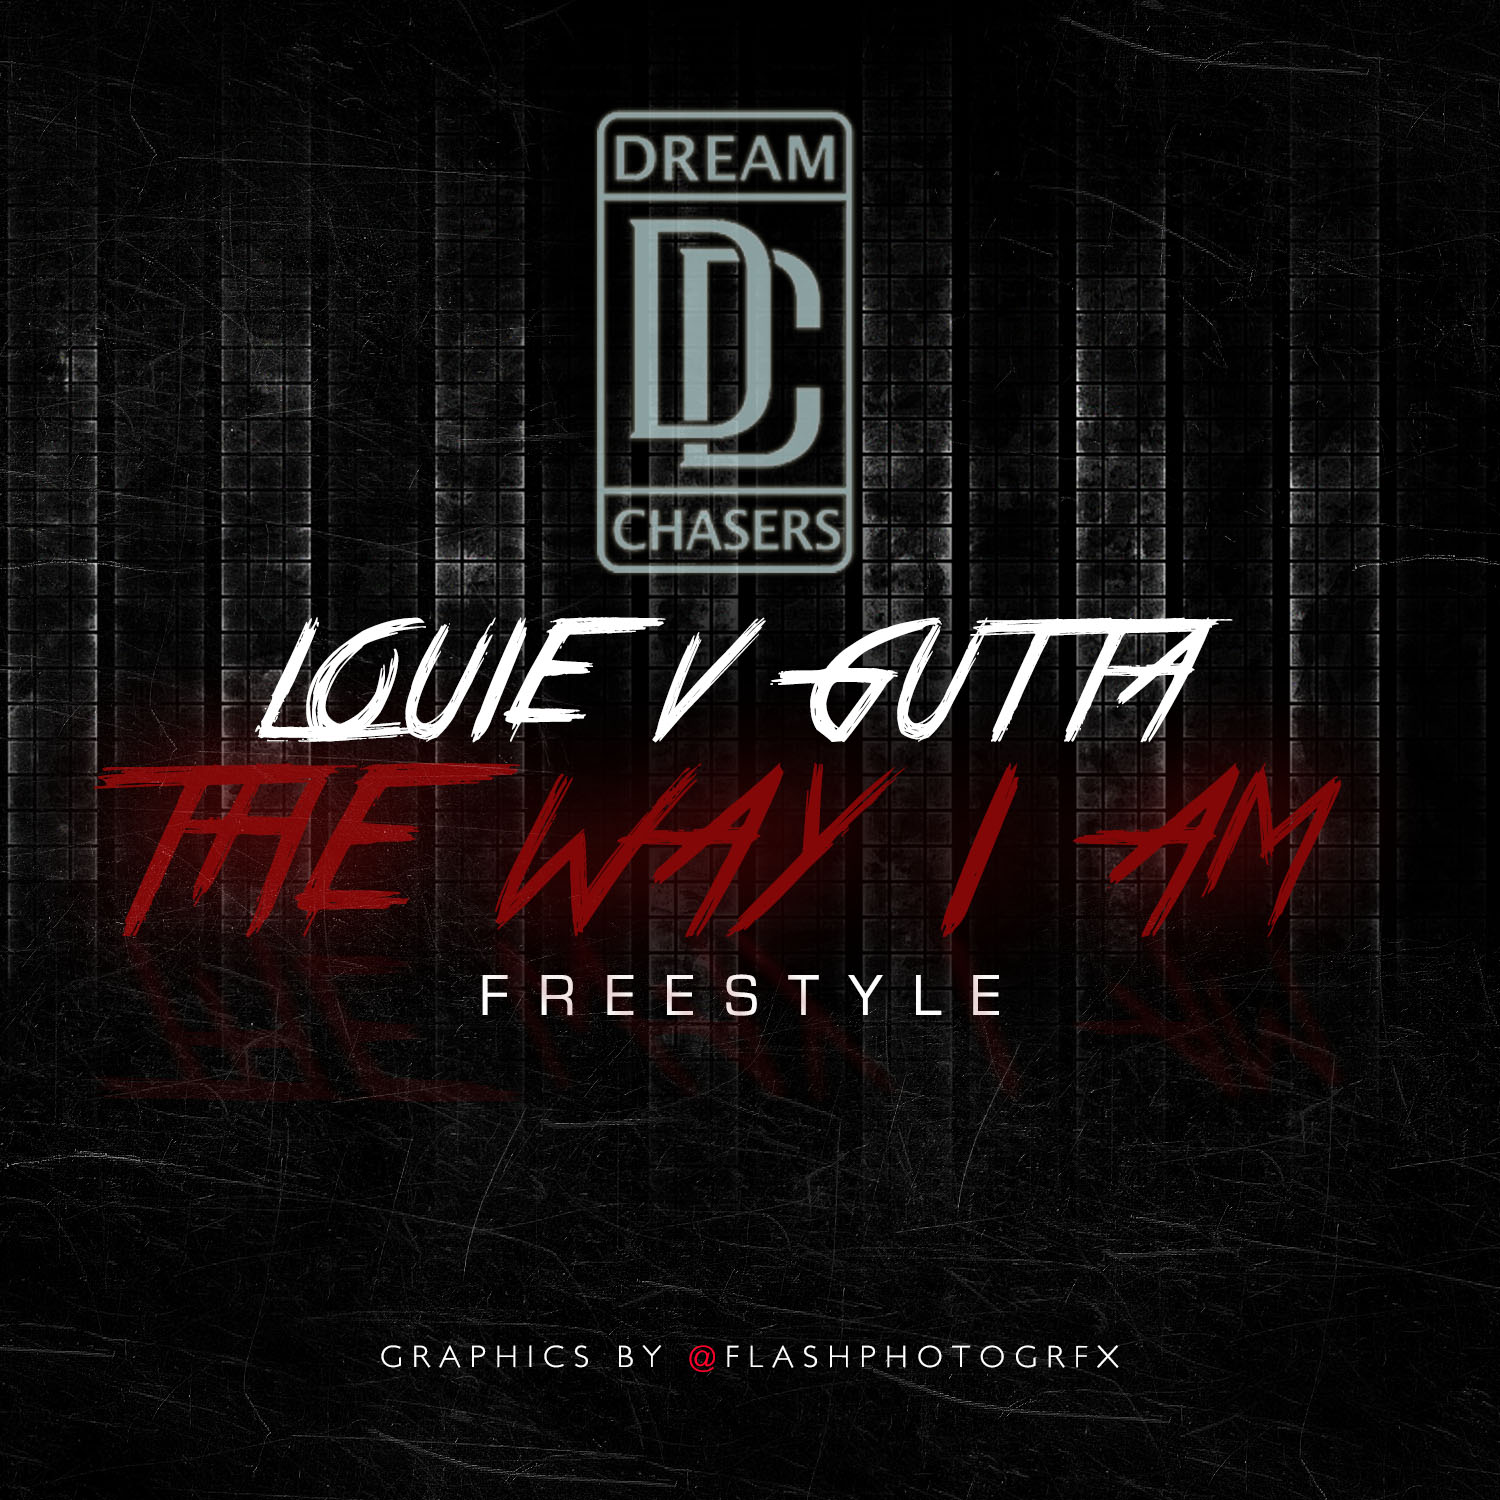 louie-v-gutta-the-way-i-am-freestyle-HHS1987-2013 Louie V Gutta - The Way I Am Freestyle  